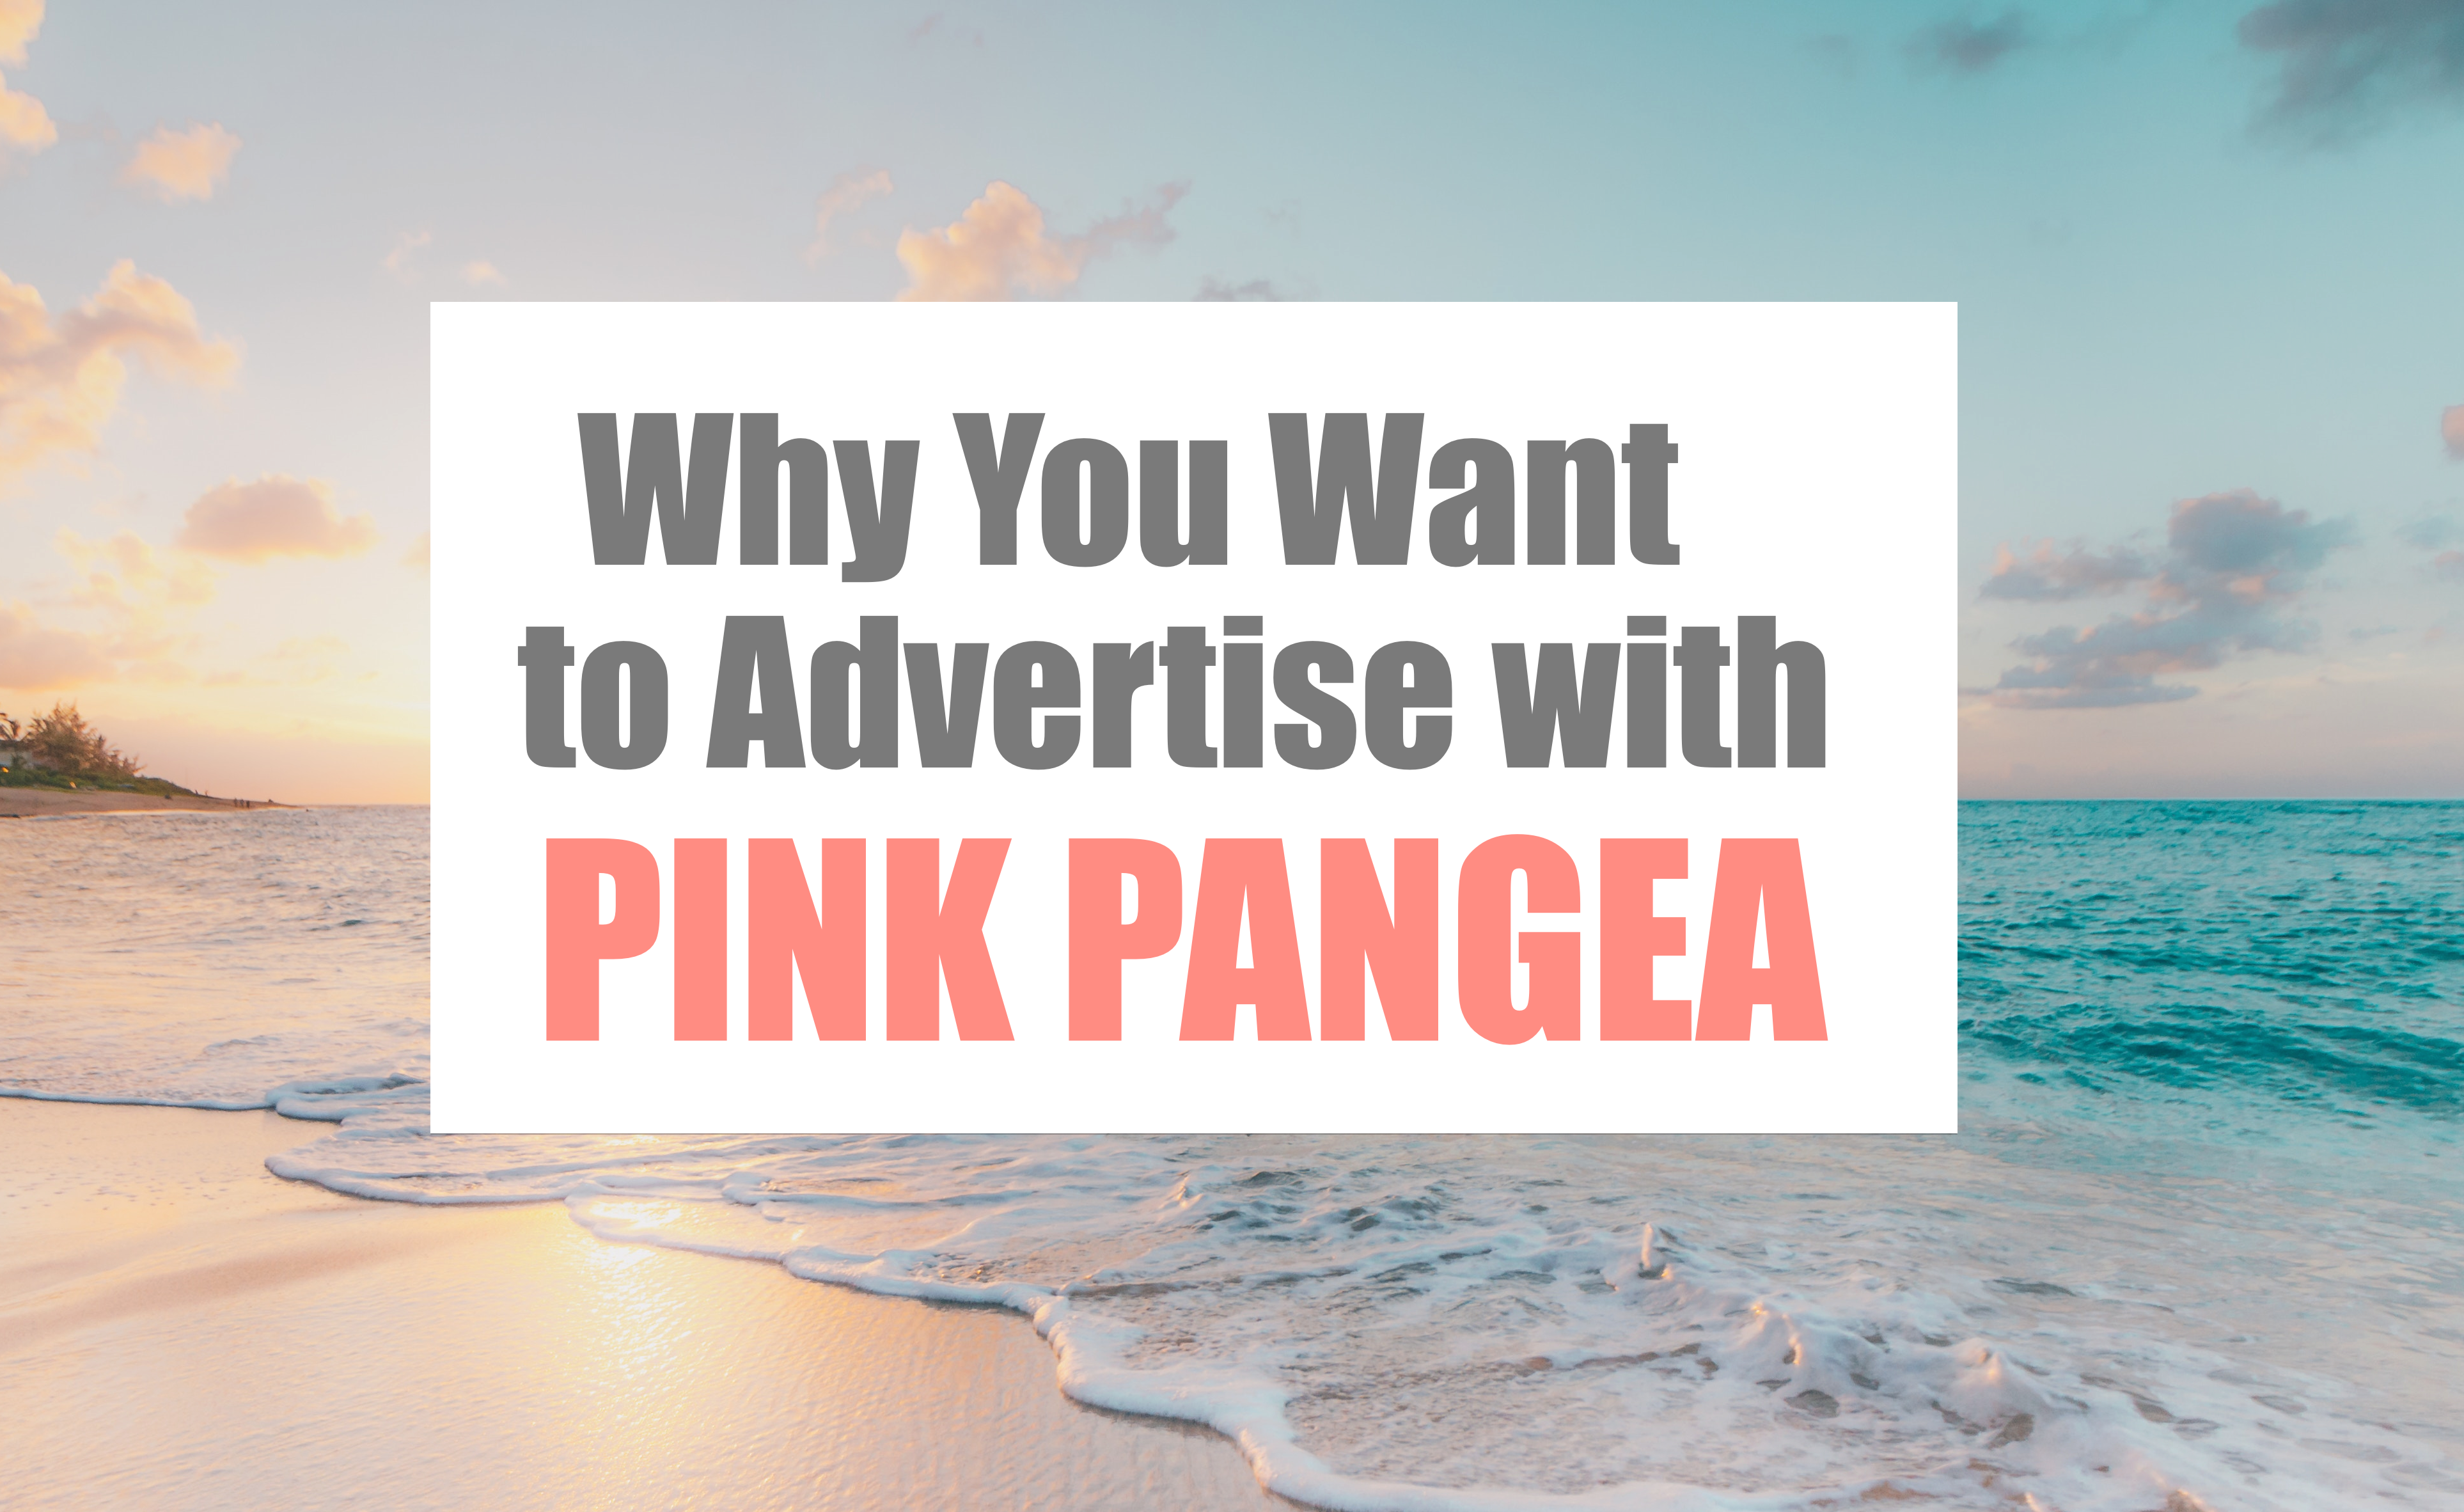 Advertise with Pink Pangea